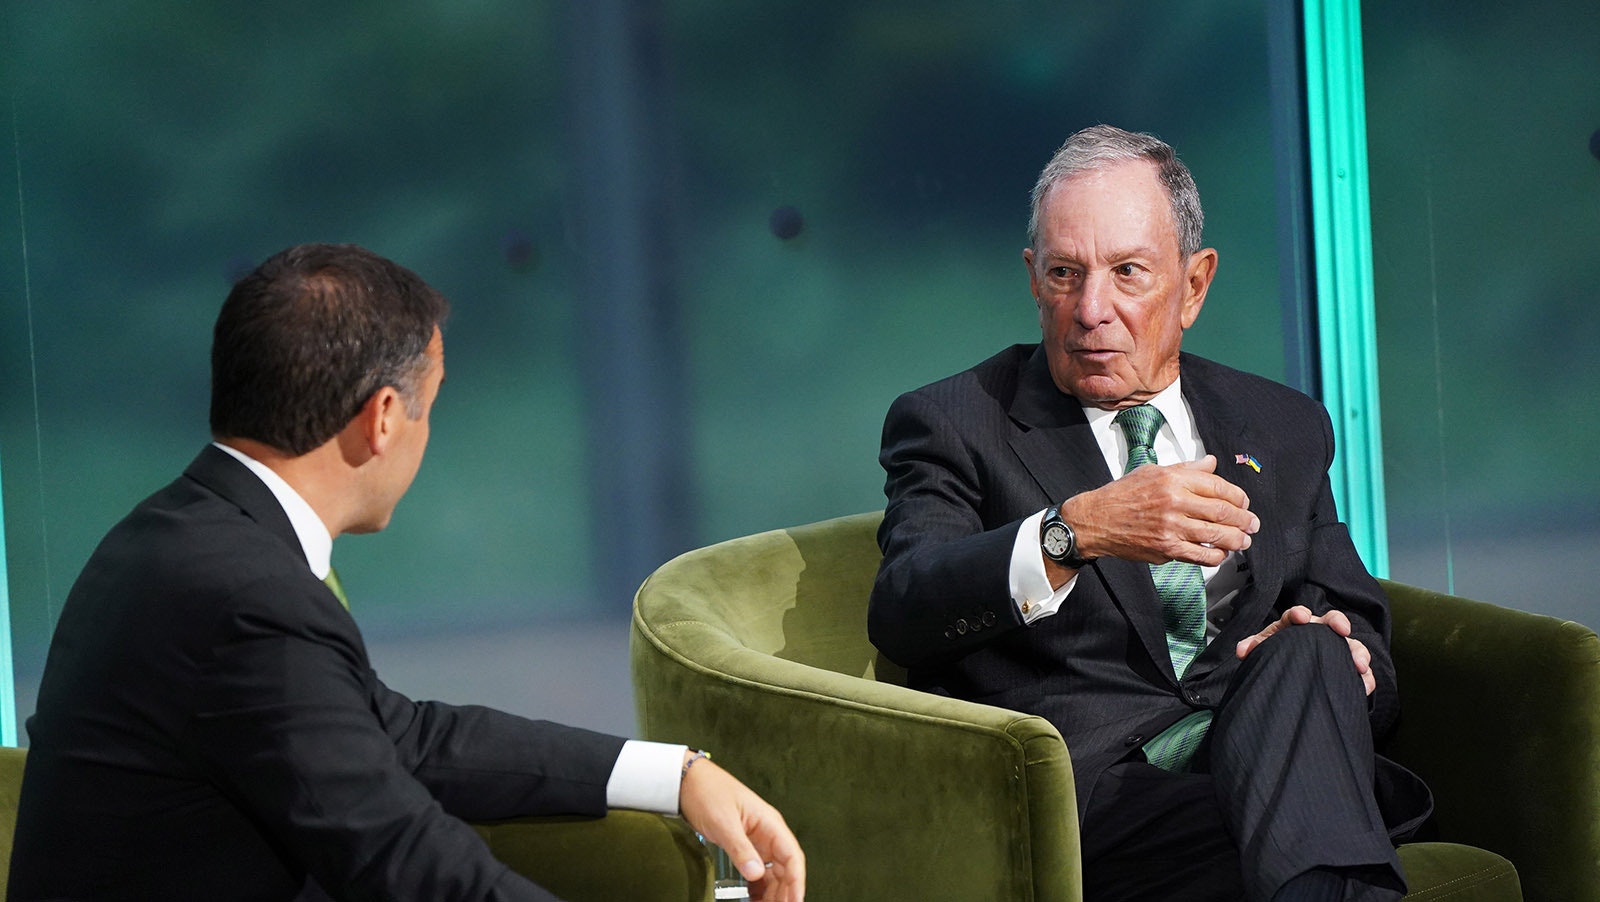 Billionaire Michael Bloomberg, right, speaks at Thursday's New York Times Climate Summit. He's pledged another $500 million to bring an end to coal- and gas-fired power generation in the United States.